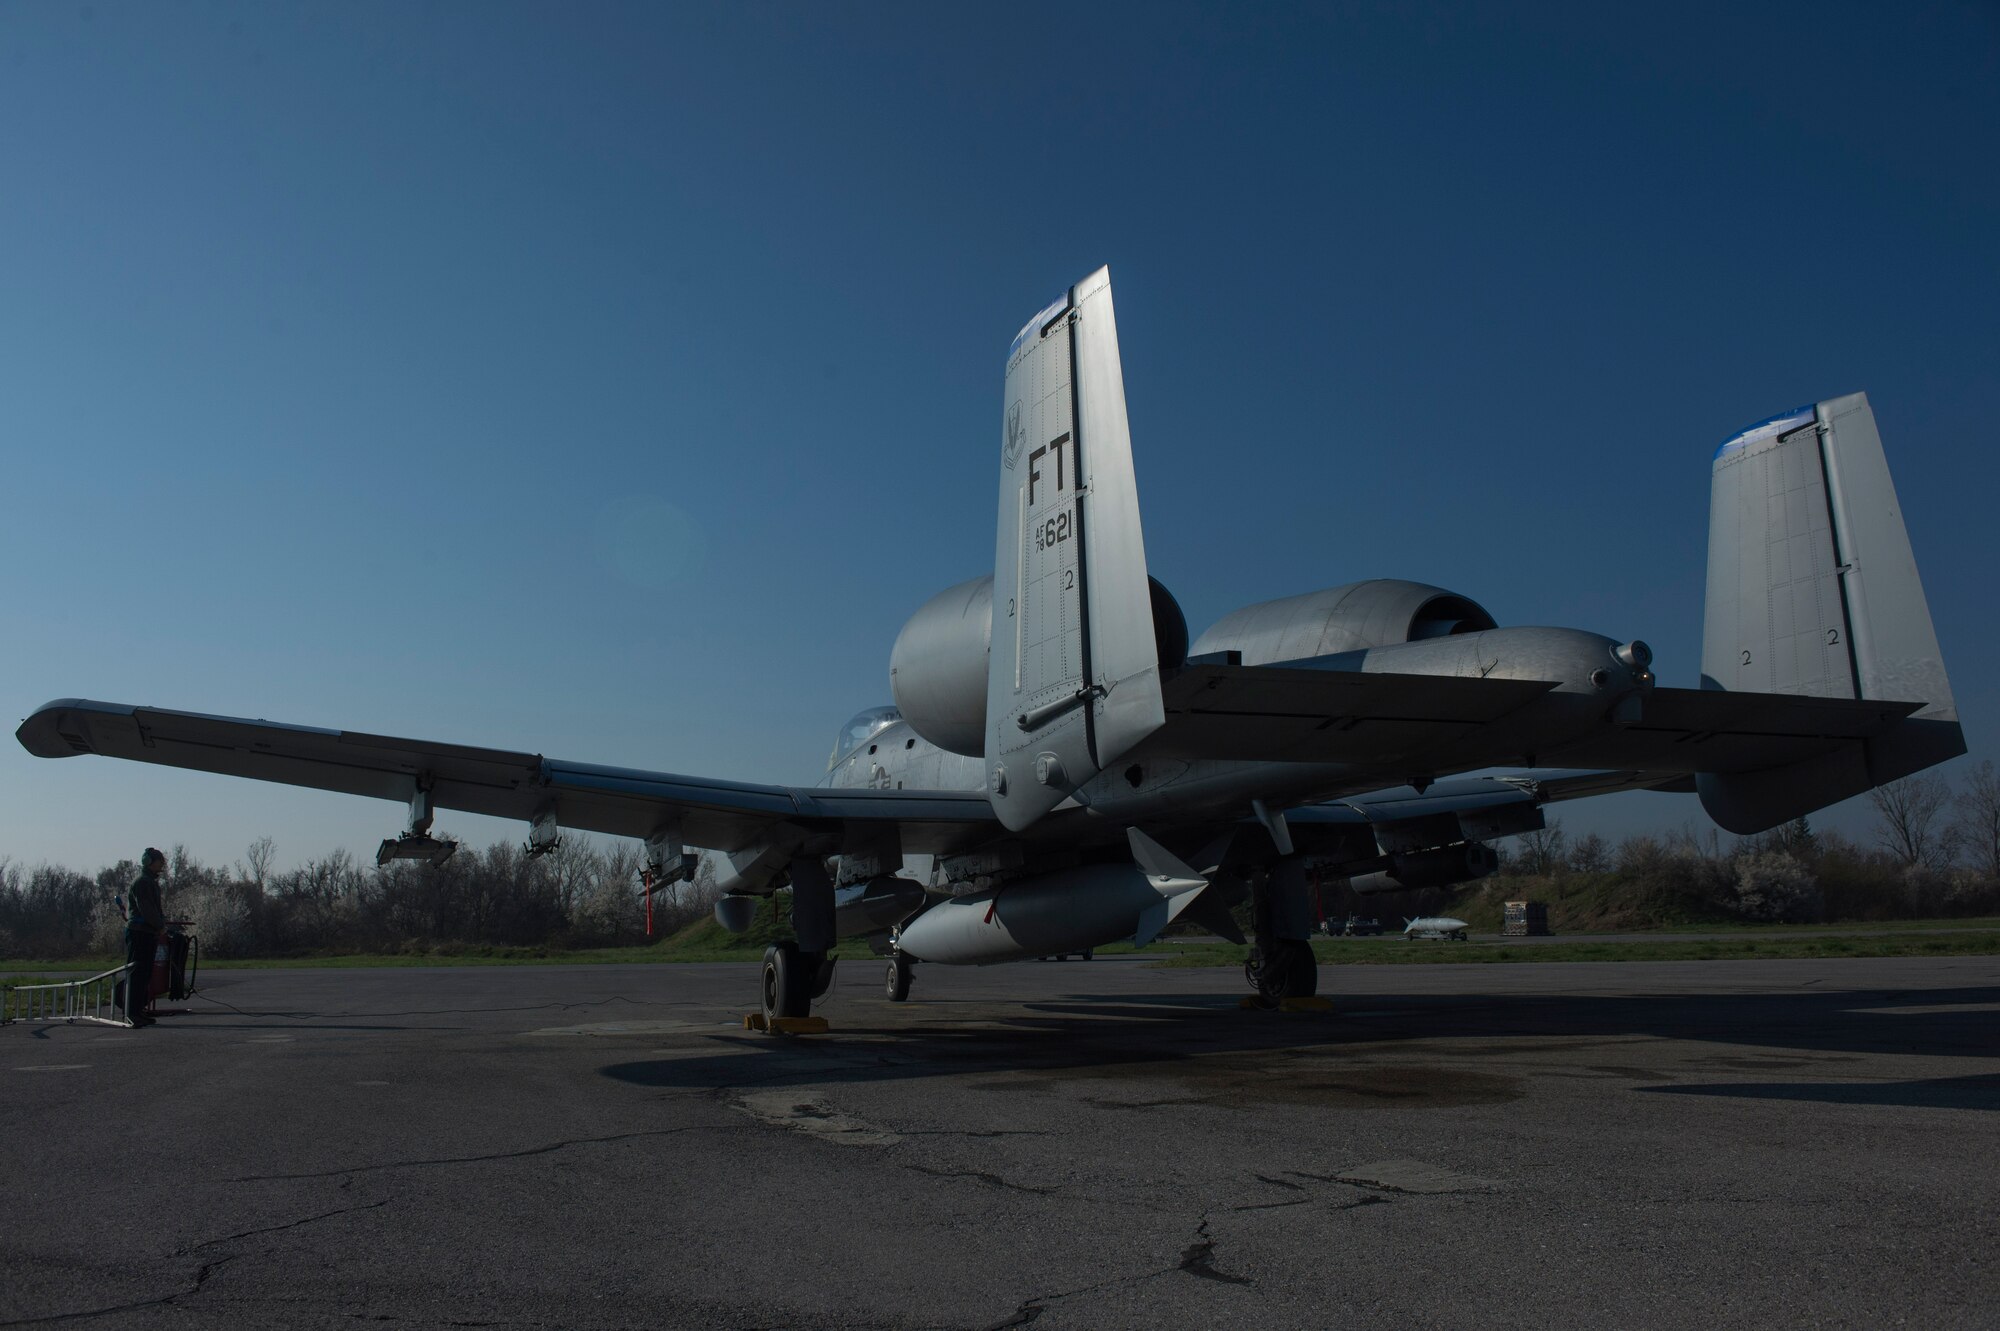 A U.S. Air Force A-10 Thunderbolt II aircraft pilot assigned to the 74th Expeditionary Fighter Squadron prepares taxi the aircraft for takeoff during the 74th EFS’s deployment in support of Operation Atlantic Resolve at Graf Ignatievo, Bulgaria, March 18, 2016. The squadron served as part of a rotational force aimed at bolstering U.S. capabilities and underscoring the U.S. commitment to European security and stability. (U.S. Air Force photo by Staff Sgt. Joe W. McFadden/Released)